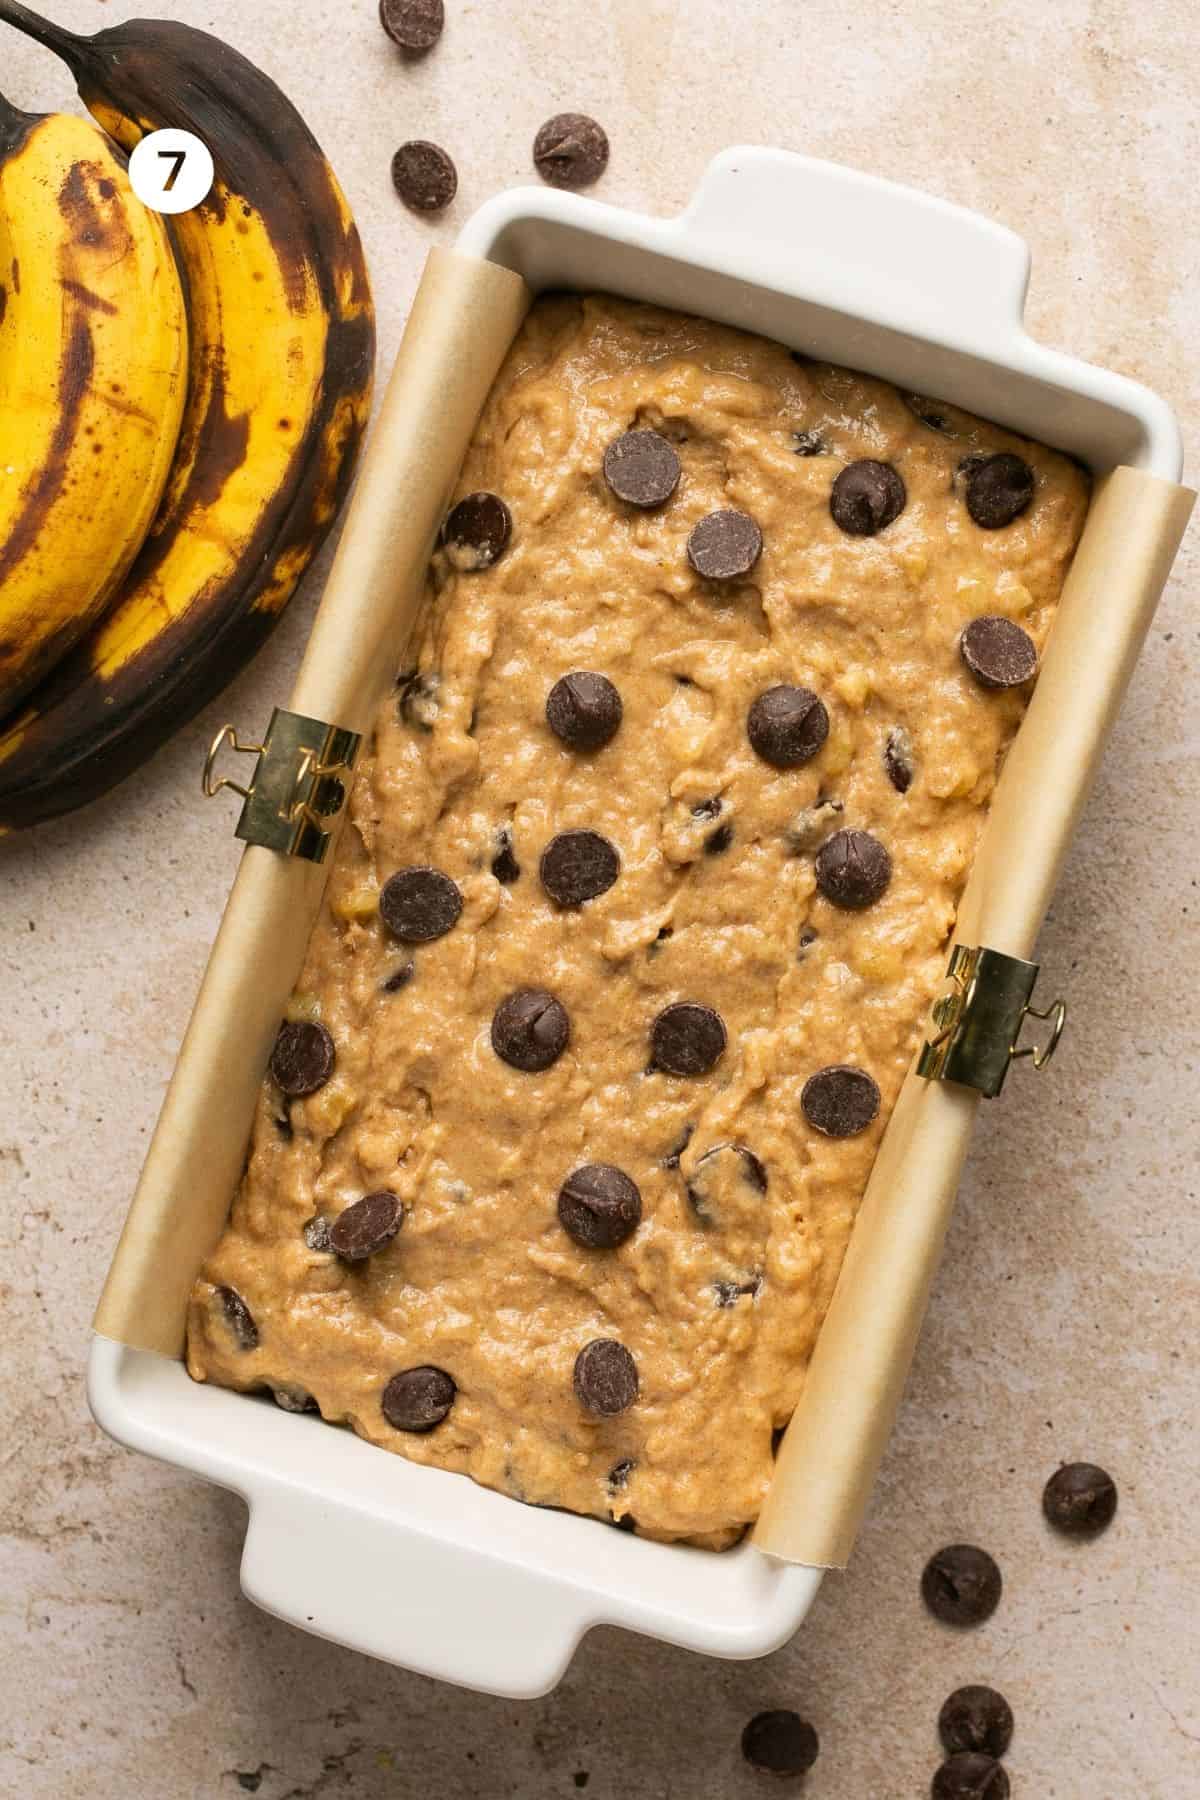 Banana bread batter poured into a 9x5-inch loaf pan to bake. 